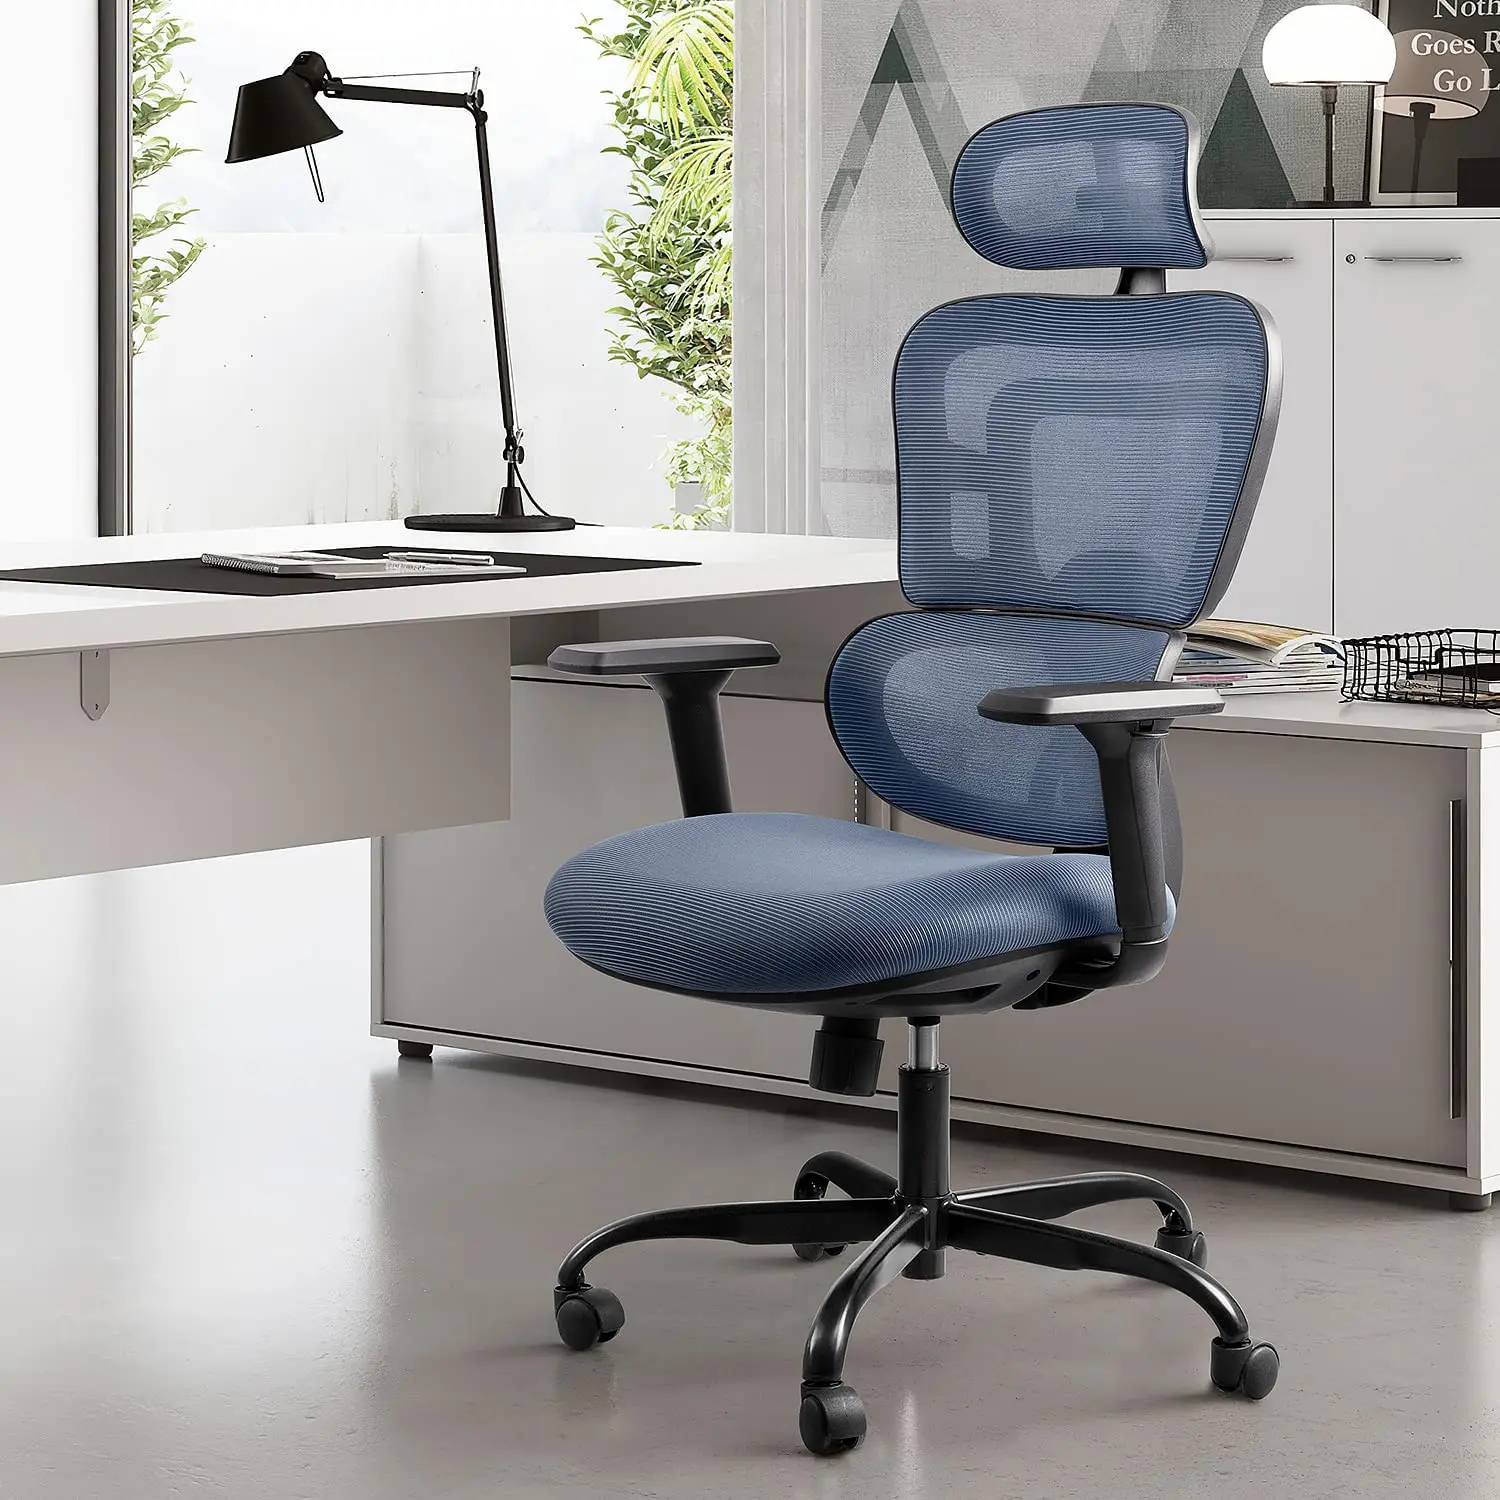 https://www.wyida.com/ergonomic-computer-desk-chairs-swivel-and-adjustable-office-mesh-chair-product/